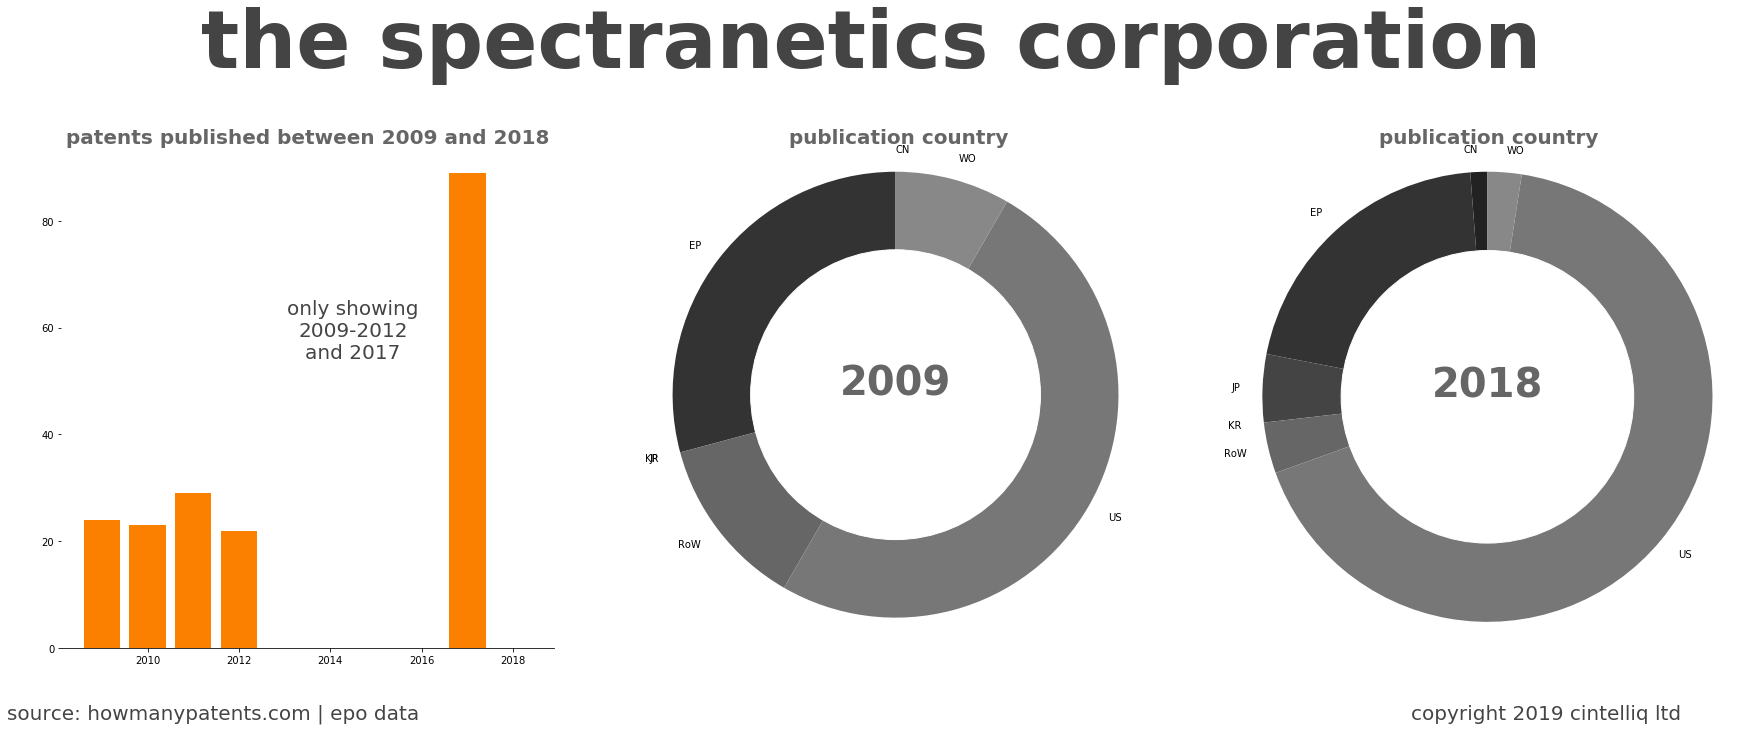 summary of patents for The Spectranetics Corporation